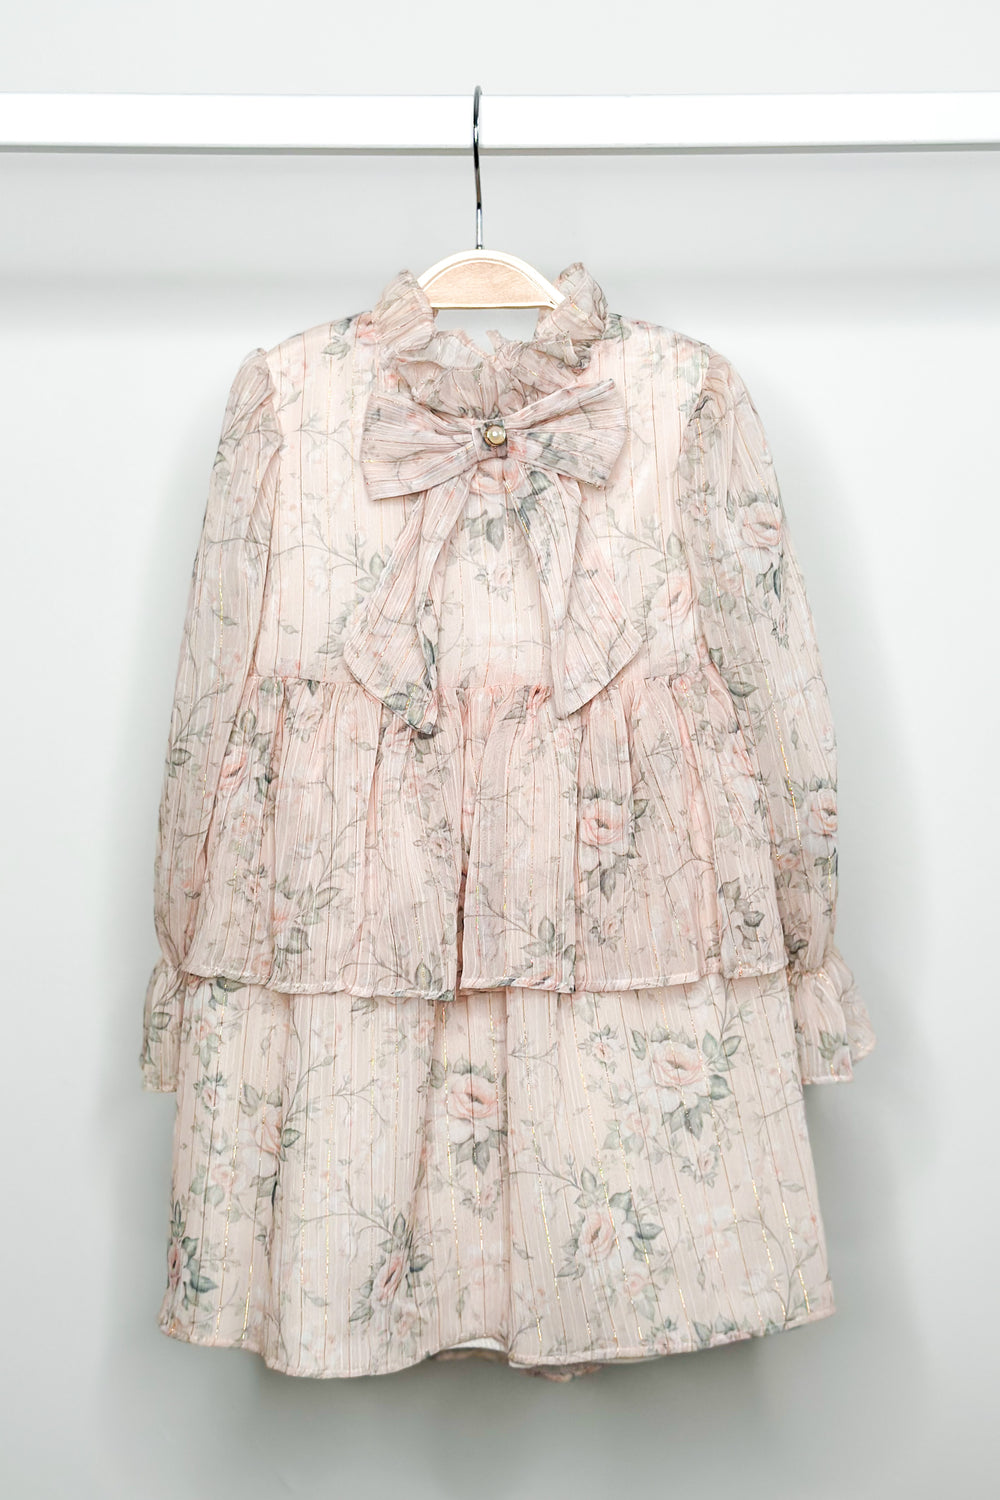 Fofettes "Vienna" Pink Floral Dress | Millie and John